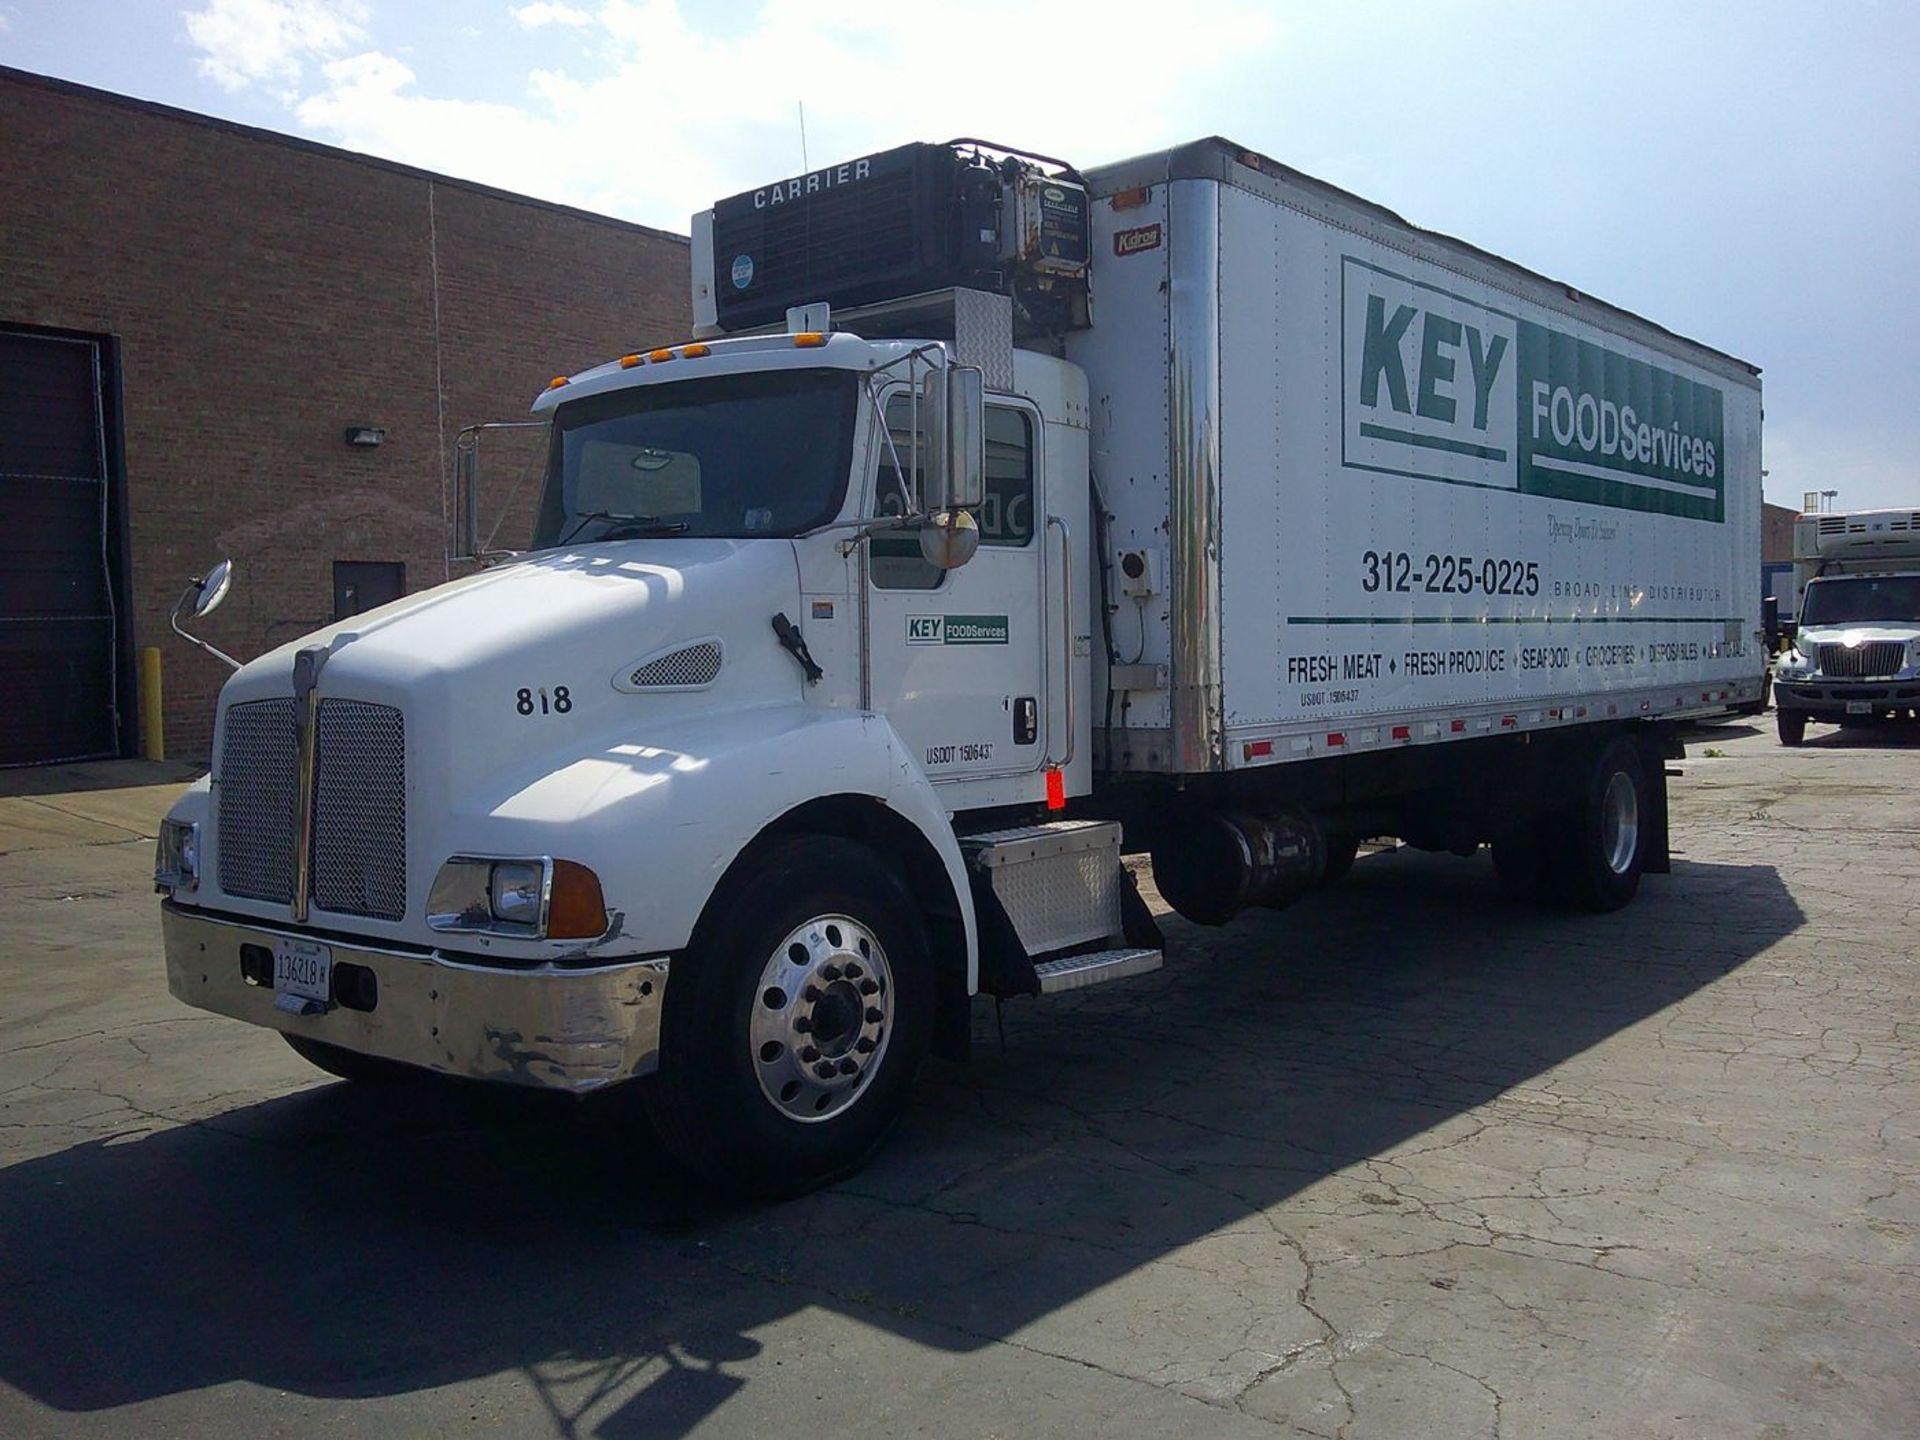 2006 Kenworth 24 ft. Model T300 Single Axle Refrigerated Box Truck, VIN: 2NKMHD6X76M130390; with